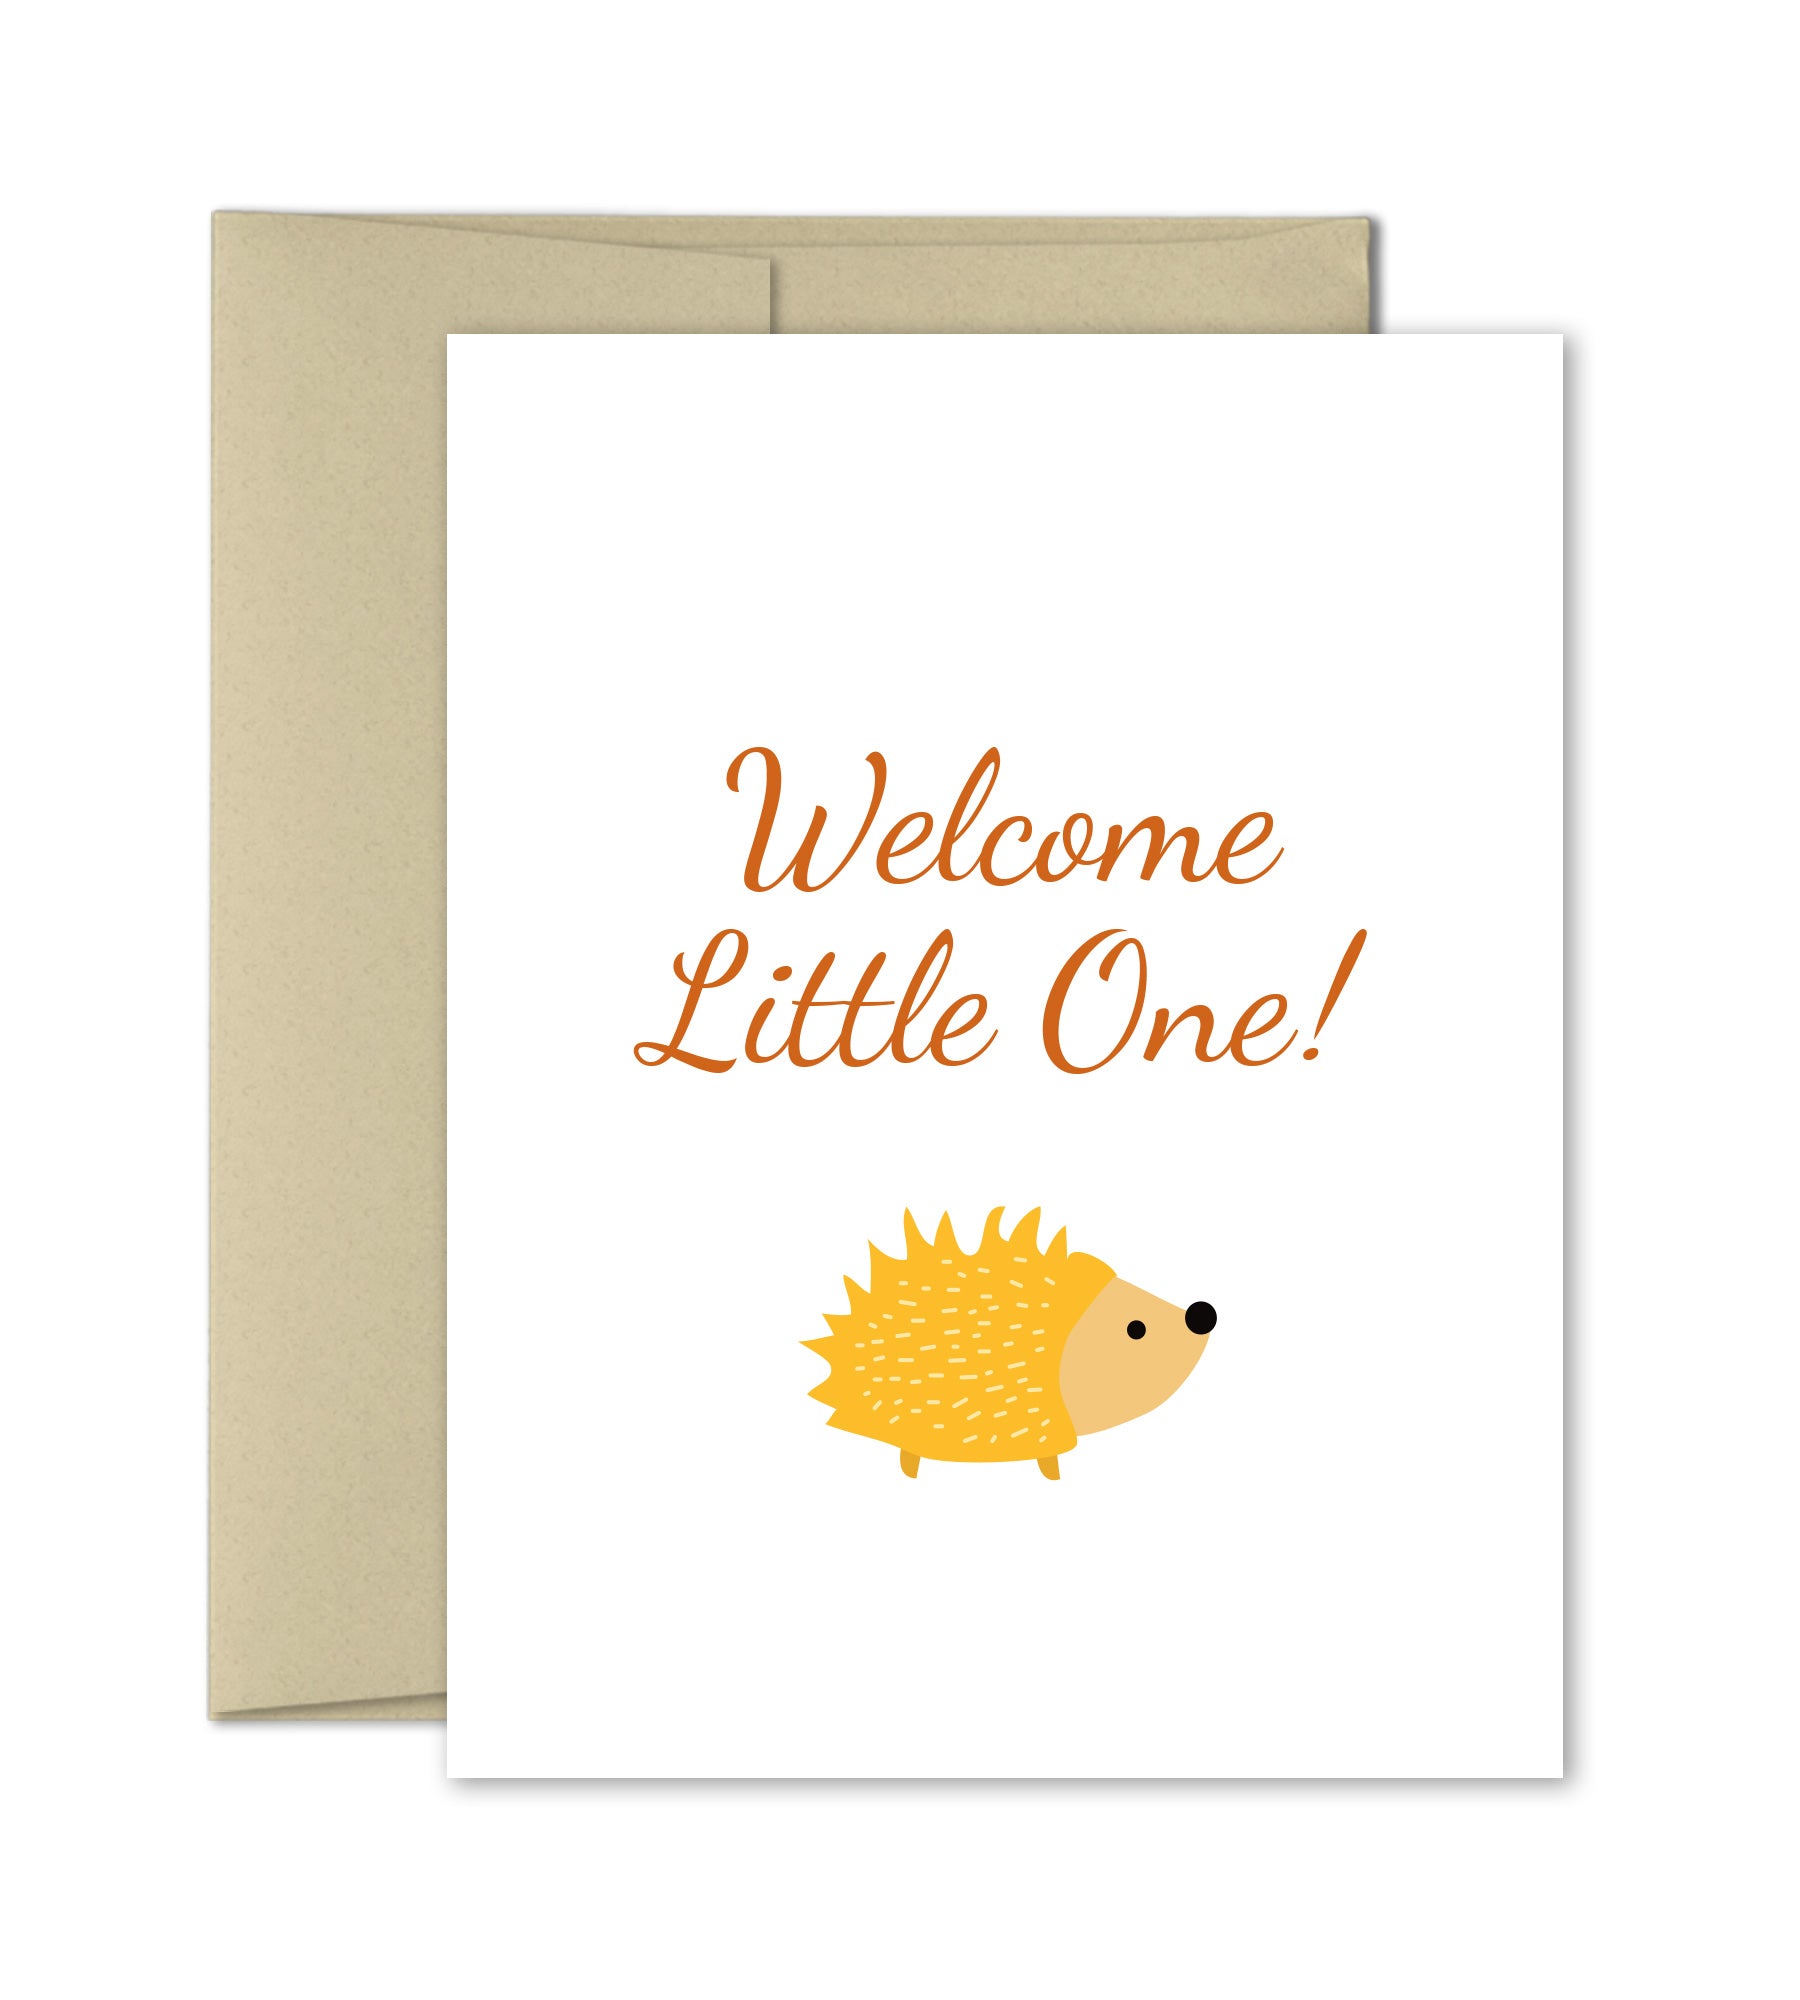 Welcome Little one- New Baby Congrats Card by The Imagination Spot - The Imagination Spot